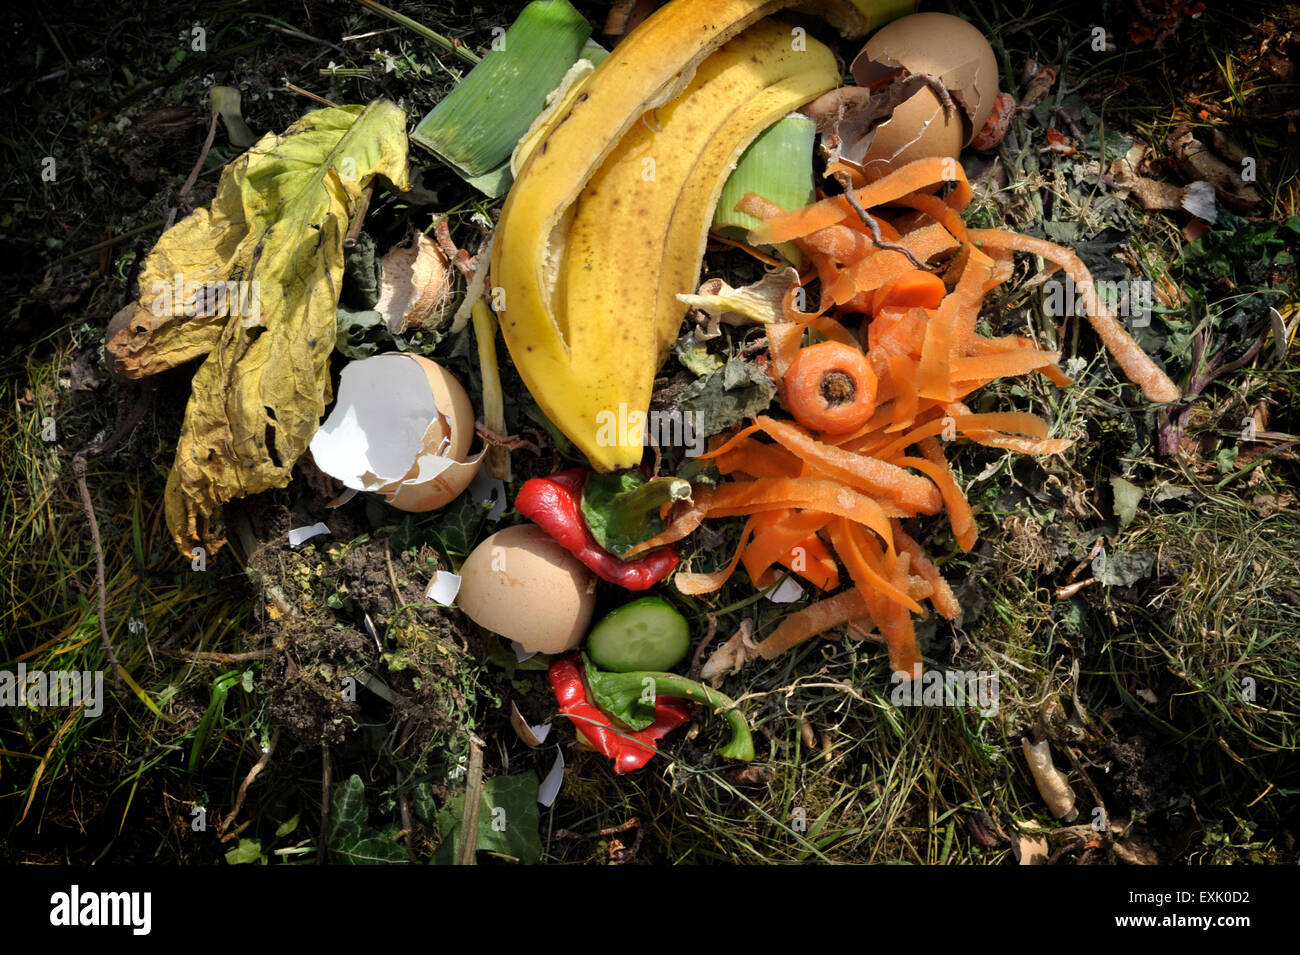 Kitchen household food and garden waste on a compost heap. Stock Photo